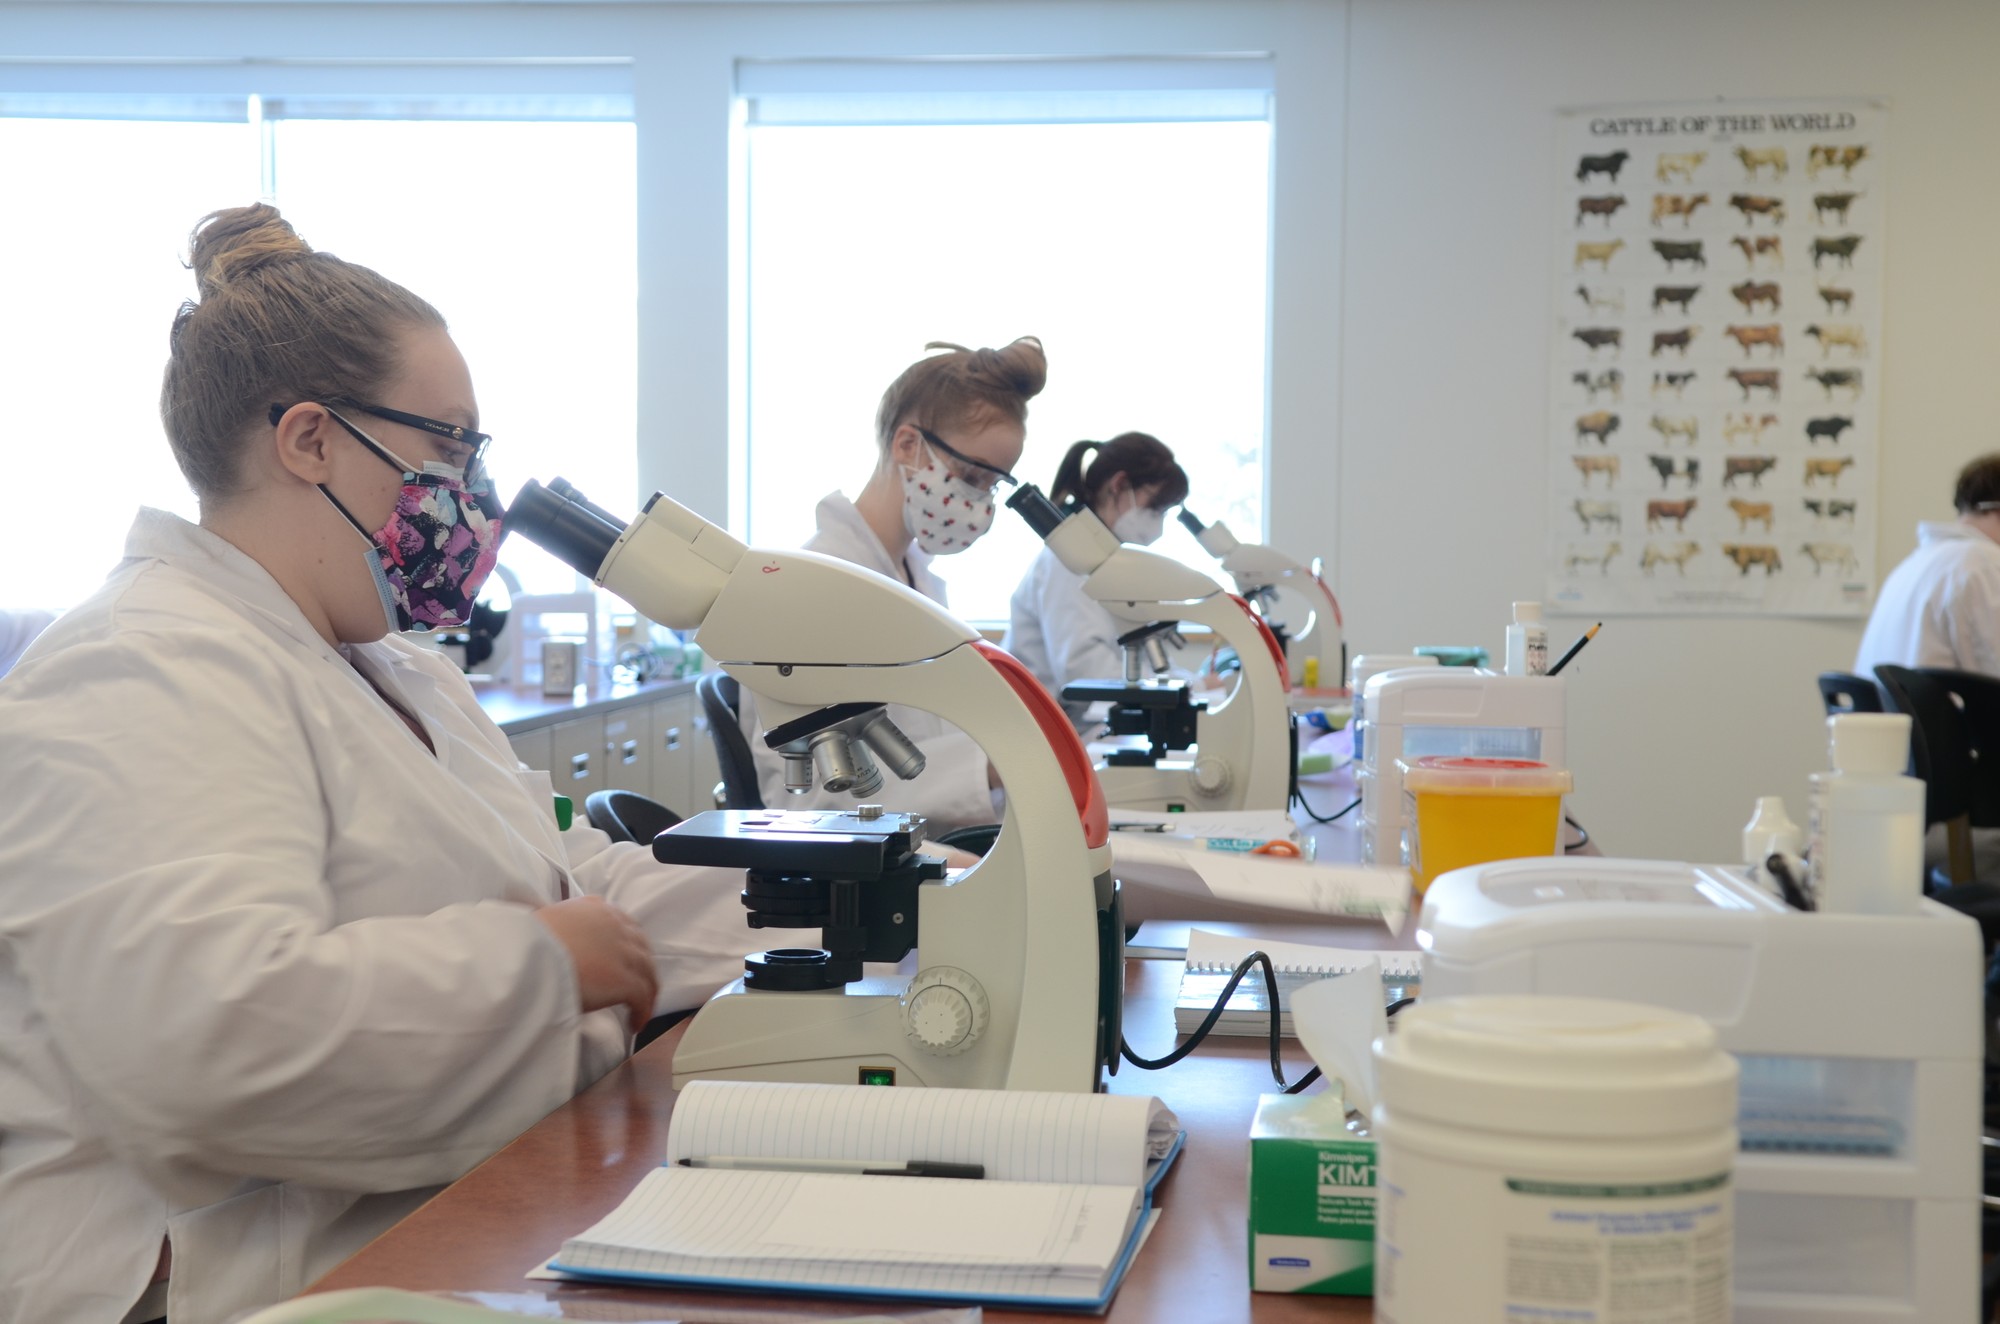 The vet tech students learn about parasitology, among other subjects, in lab classes held on campus.